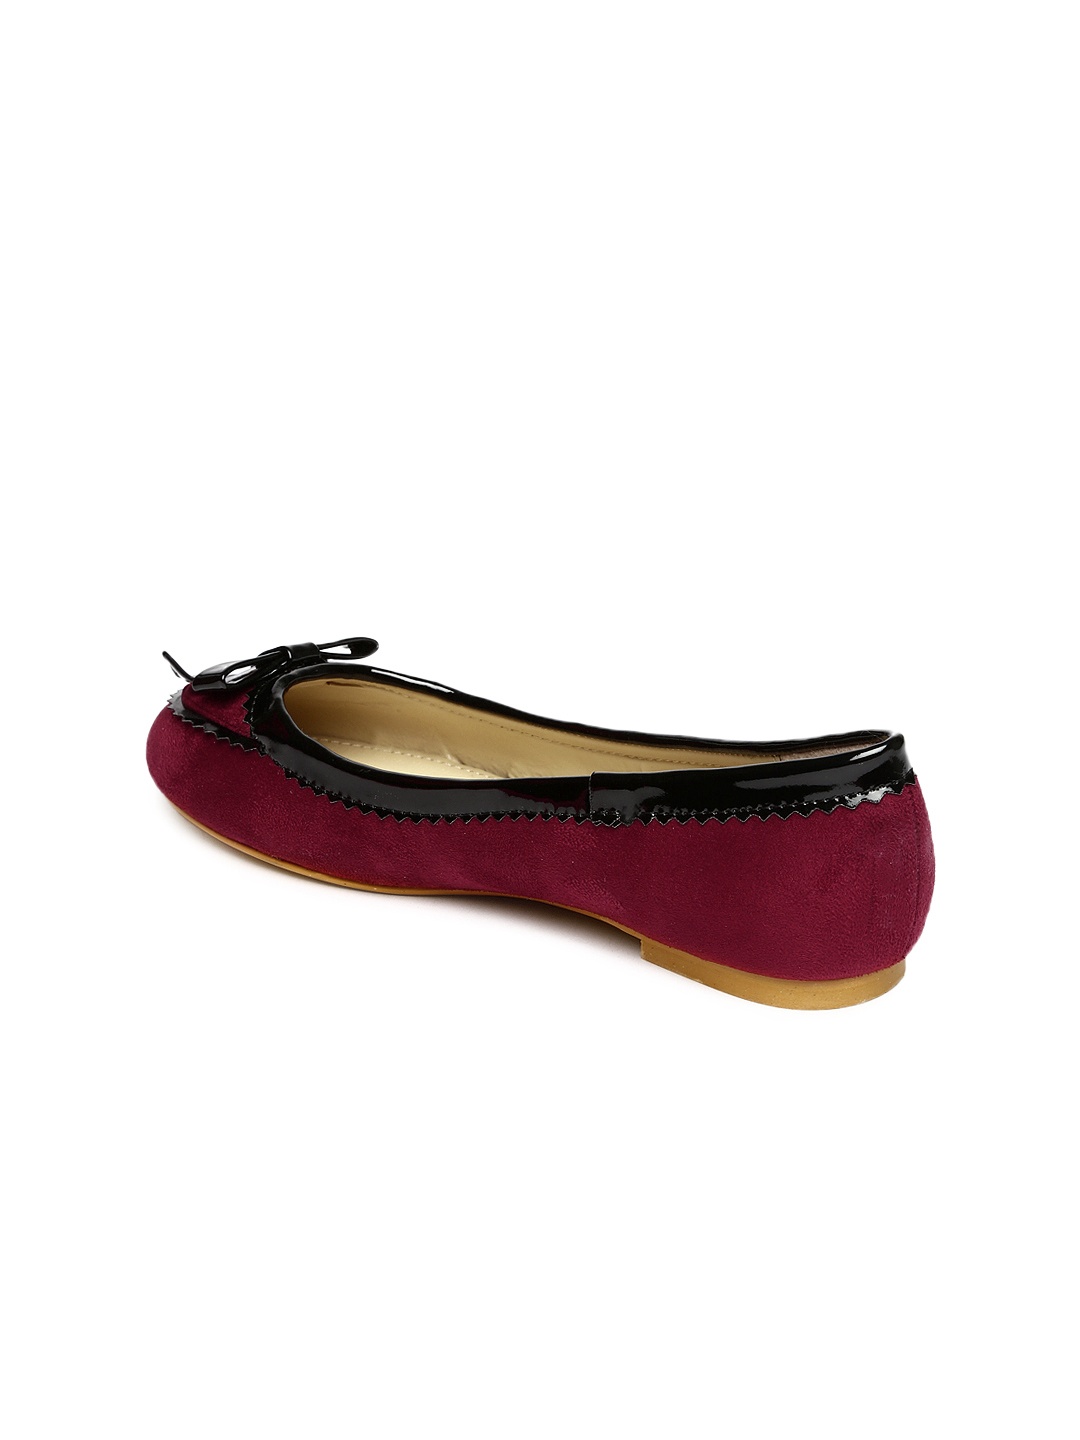 ... Product Details More Flats by DressBerry More Maroon Flats More Flats